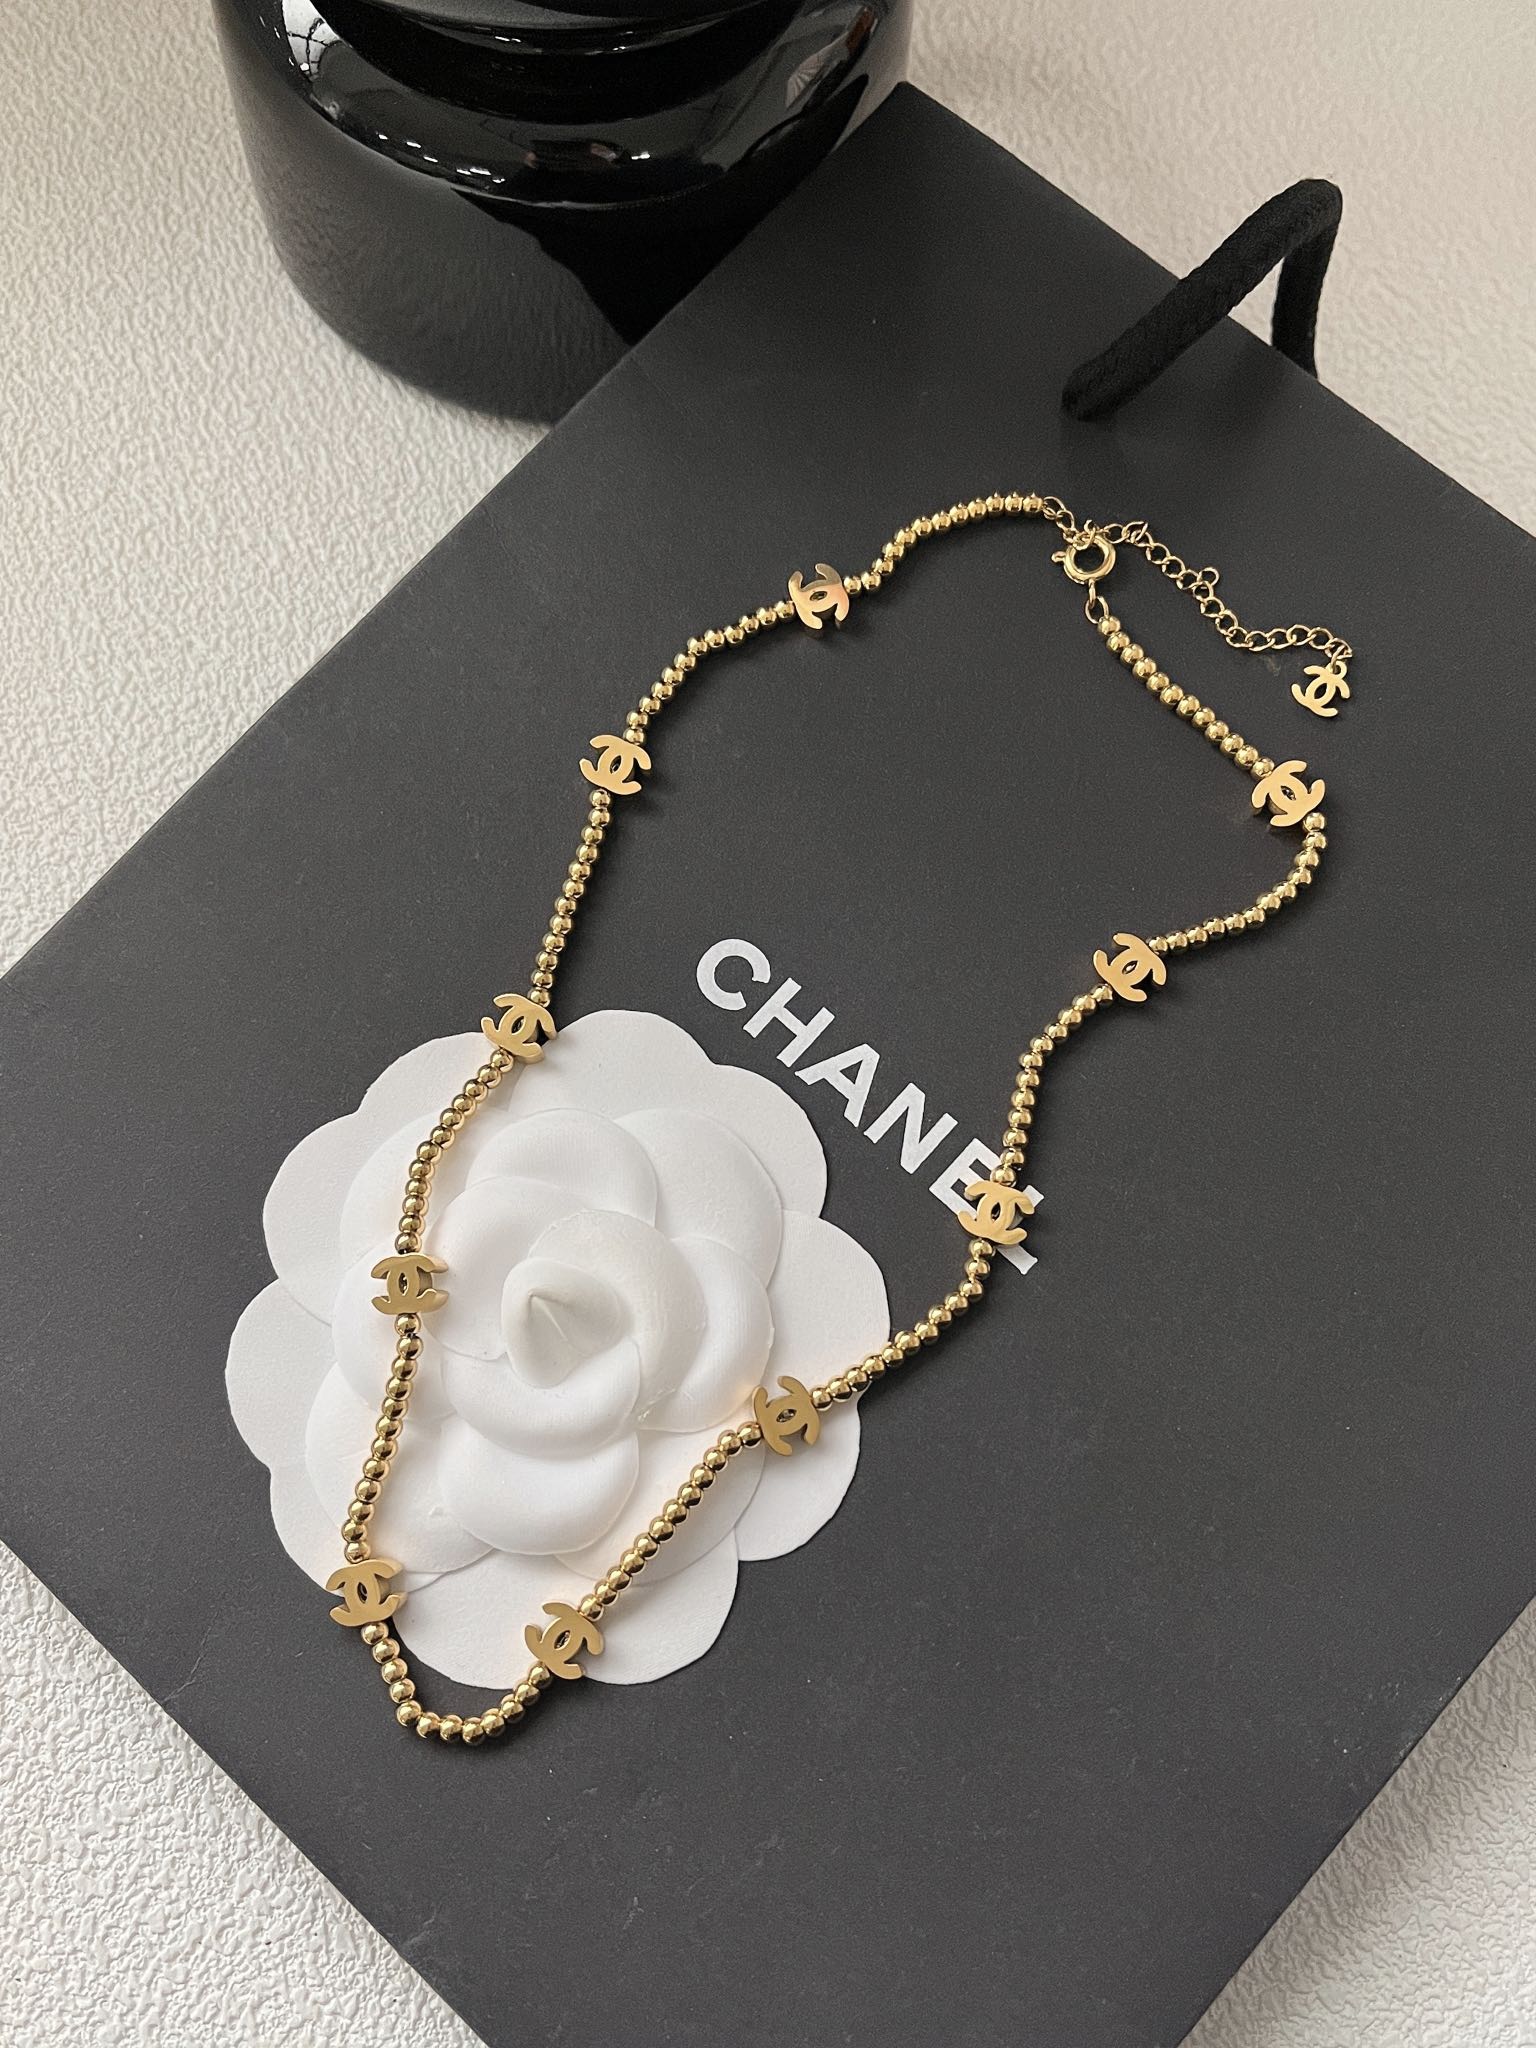 X514 Chanel choker necklace 111952